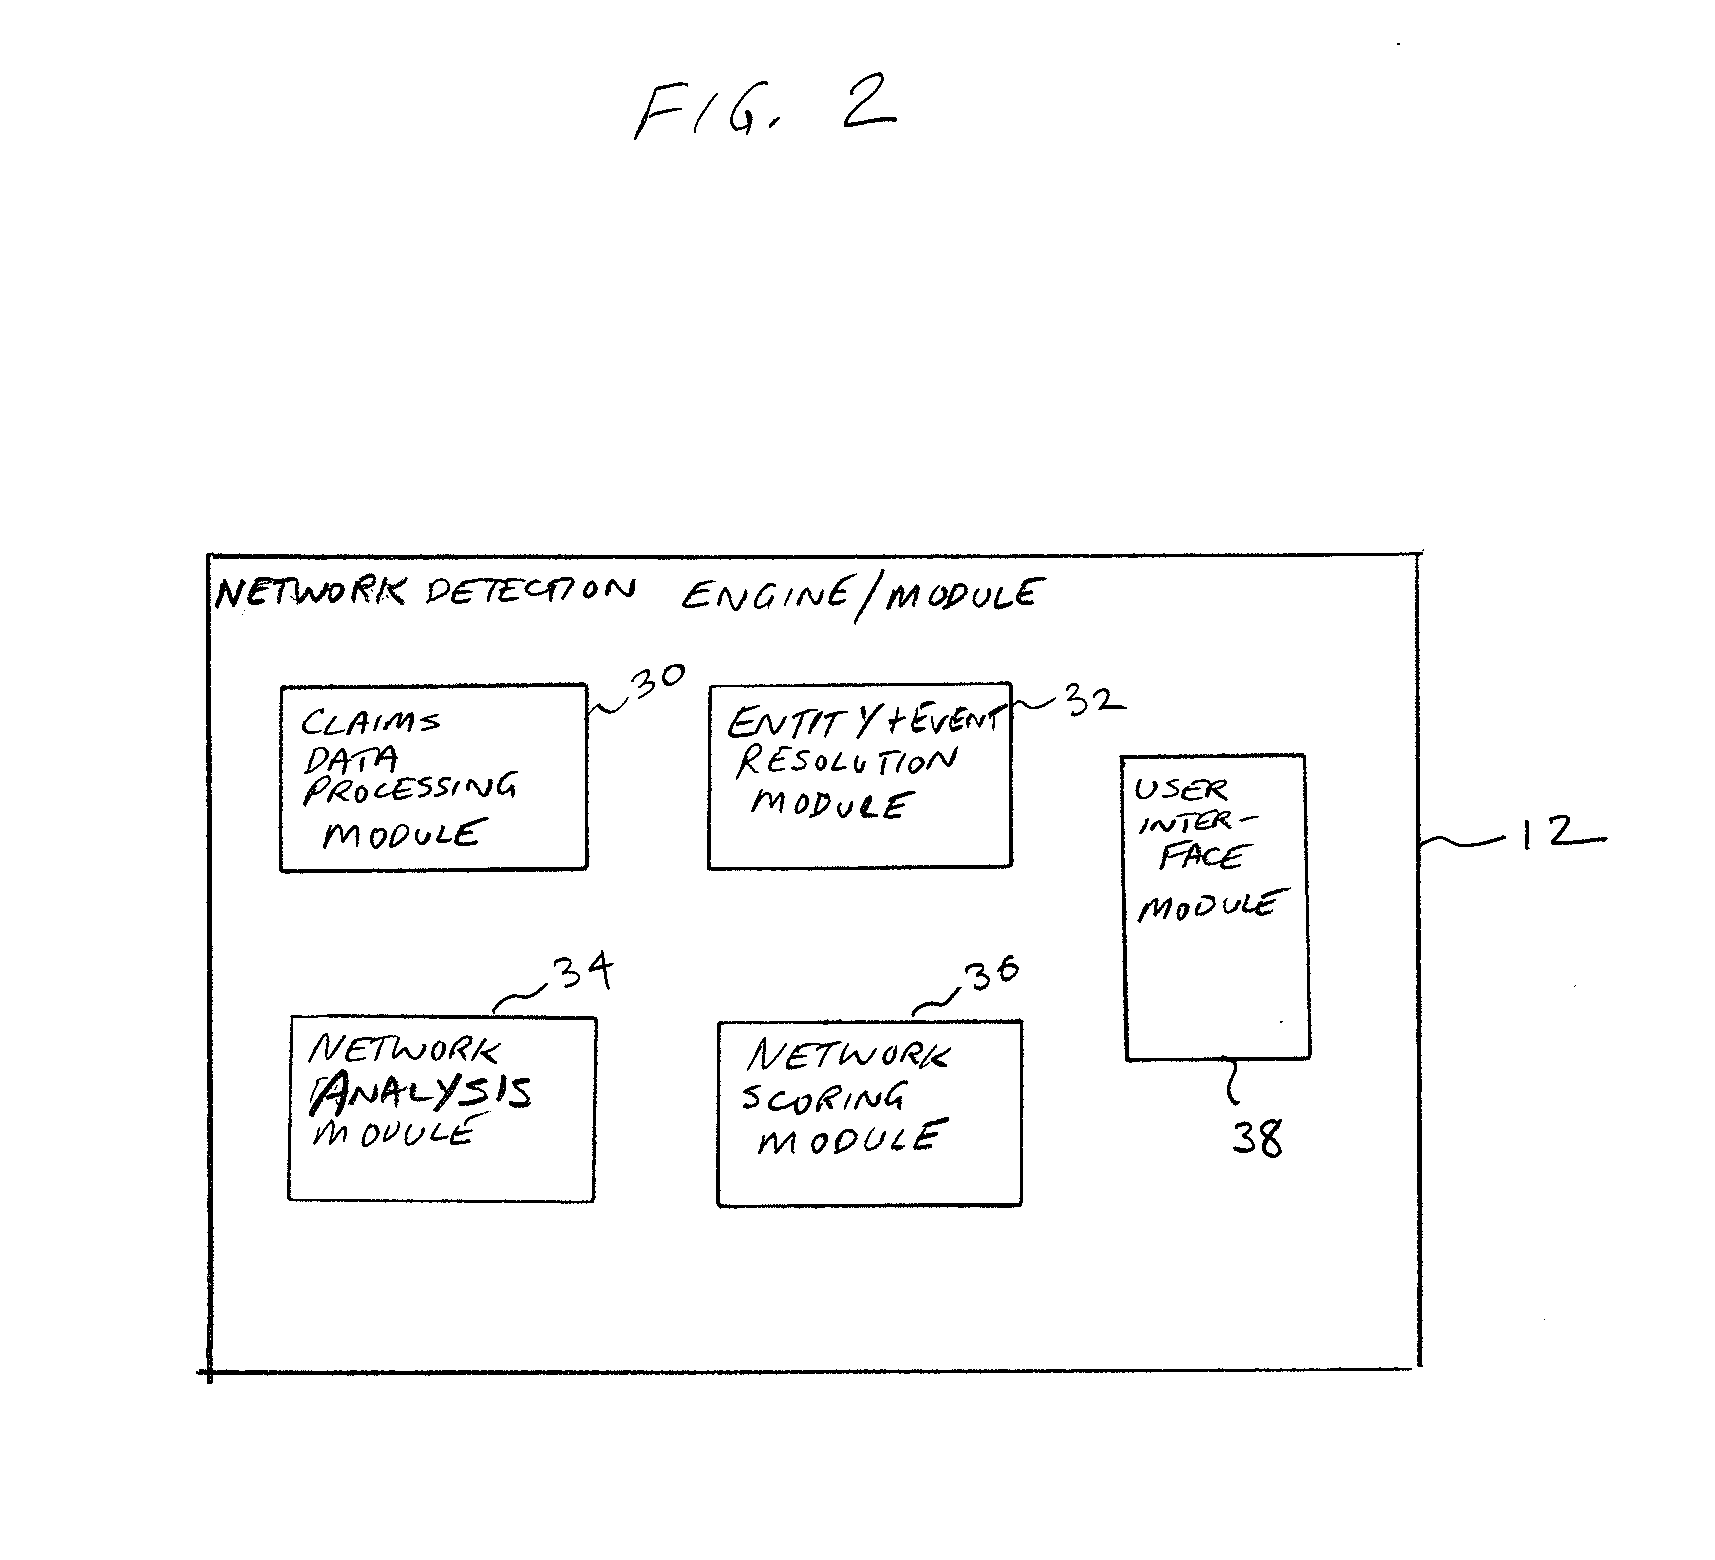 Systems and Methods for Computerized Fraud Detection Using Machine Learning and Network Analysis